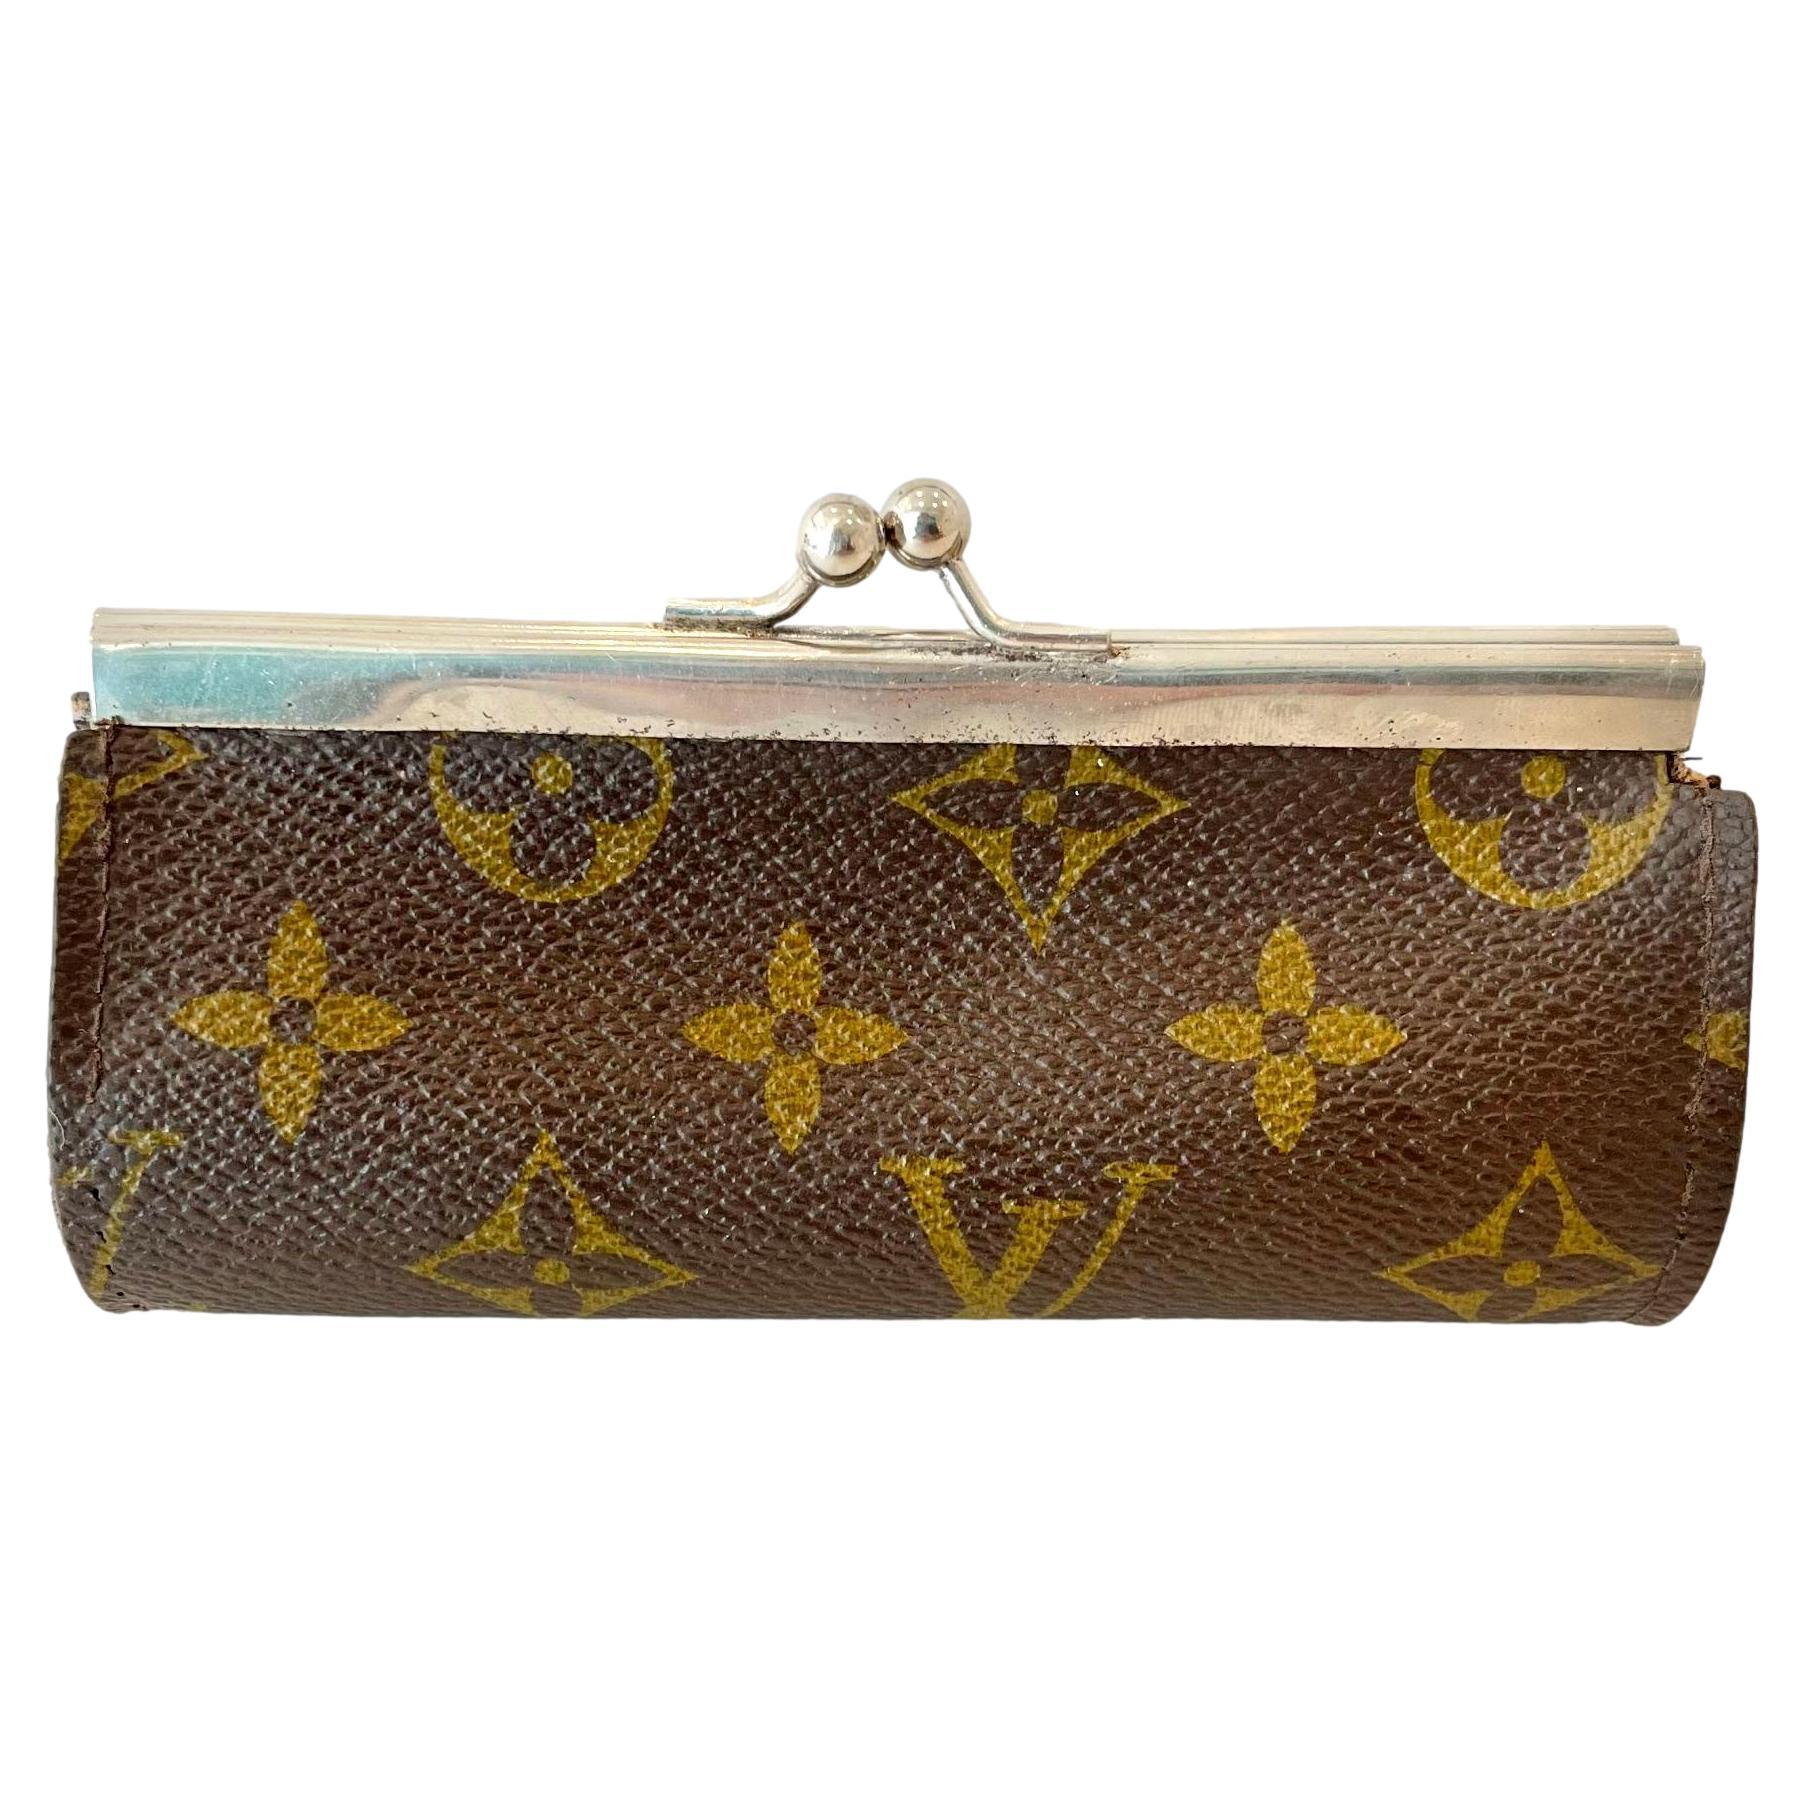 1950s Louis Vuitton Train Case For Sale At 1stdibs